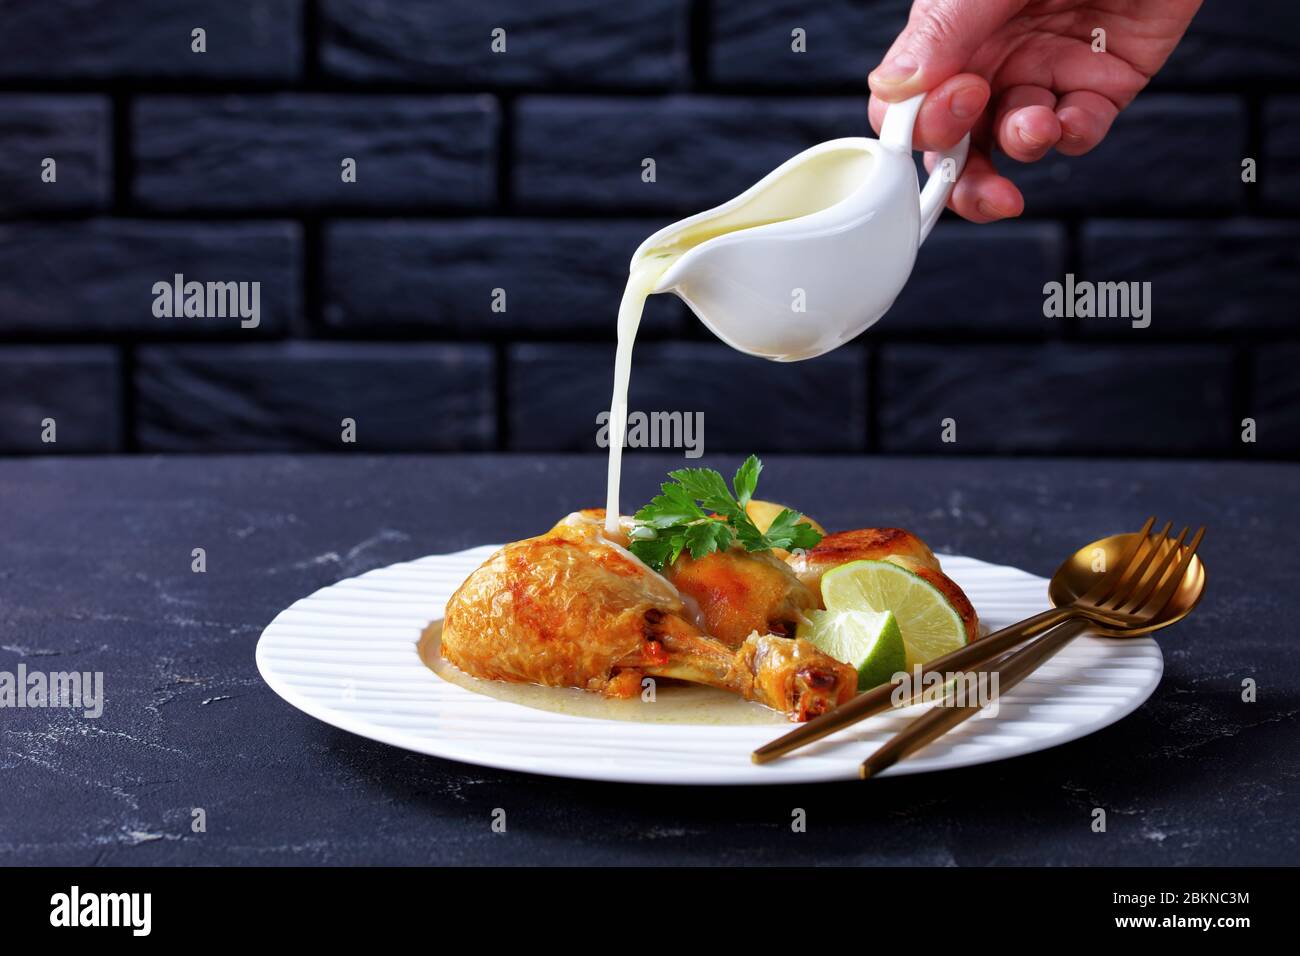 Woman hand is pouring dripping coconut sauce on top of roasted chicken leg served with baby potatoes on a white plate, horizontal view from above Stock Photo